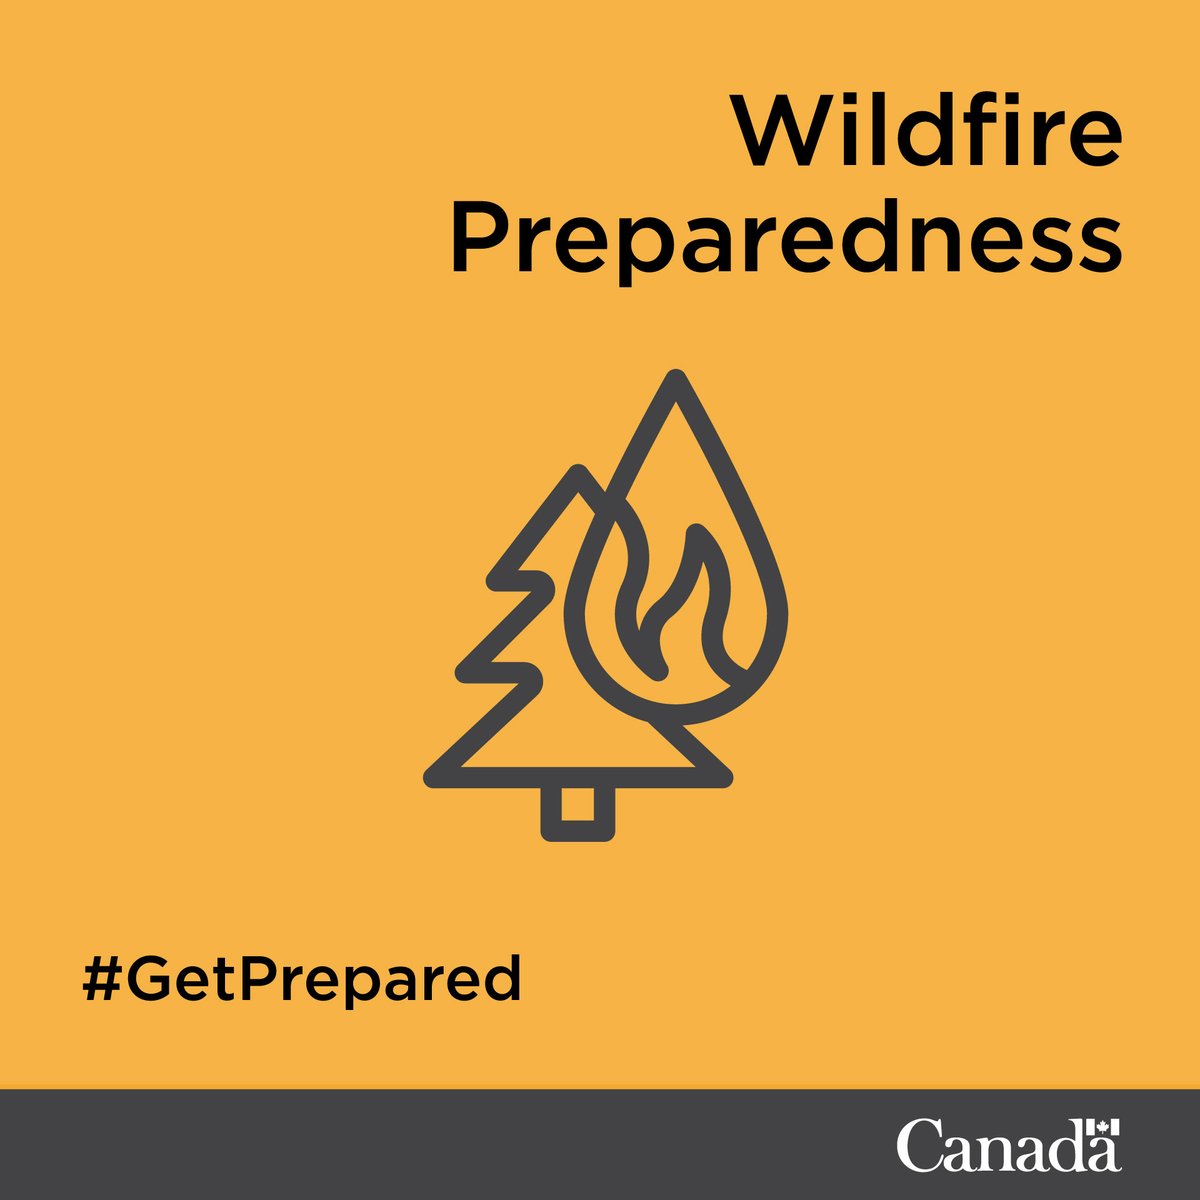 Make sure to stay informed on what to do before, during, and after a wildfire. For information on what to do to protect your home, your family, and yourself: getprepared.gc.ca/cnt/hzd/wldfrs…